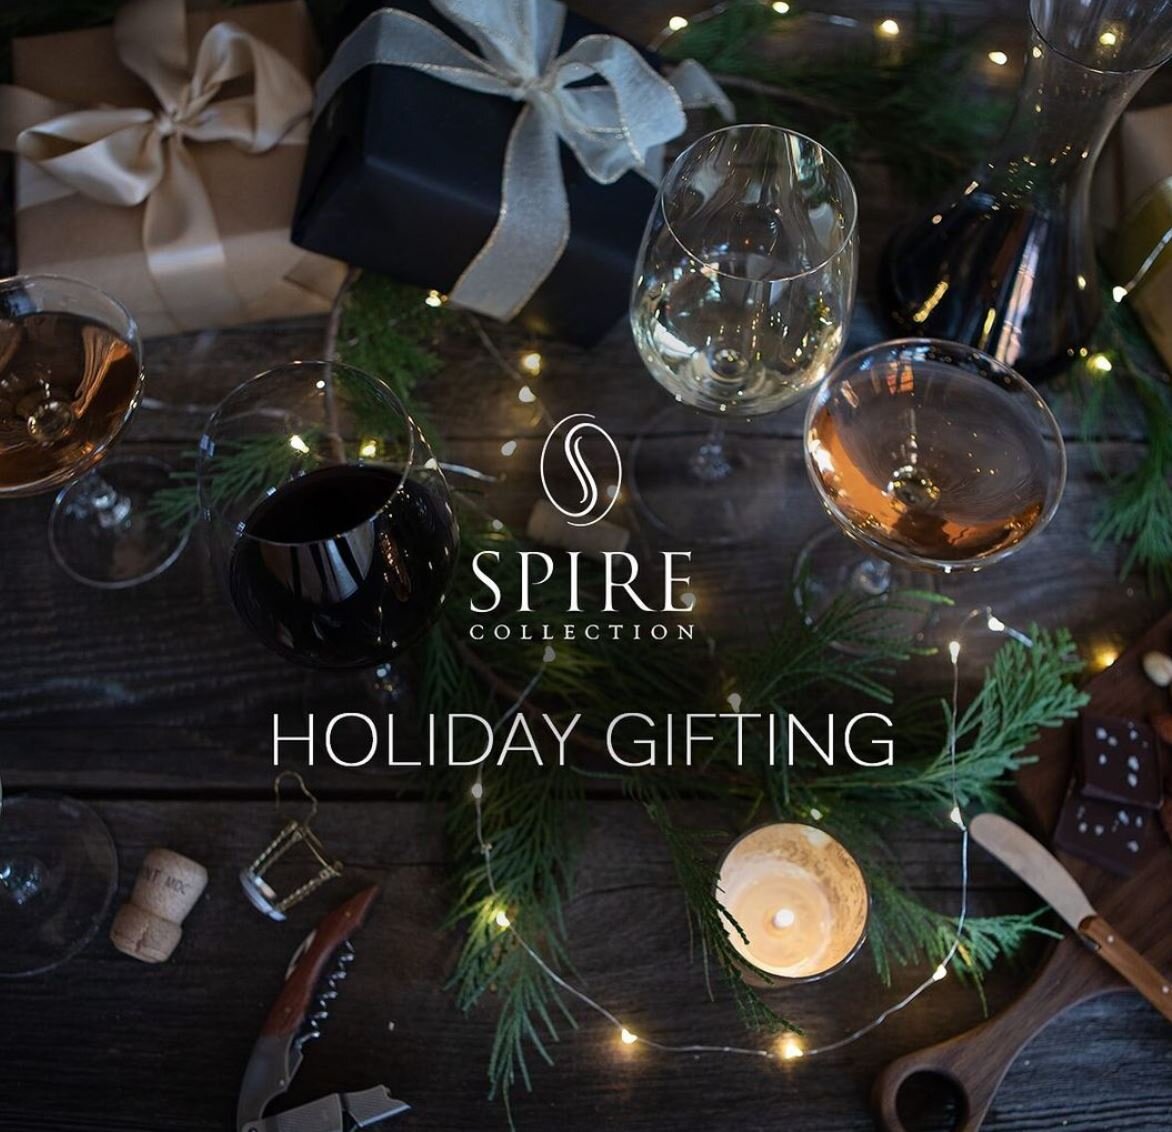          No travel this year? No problem! Gifting the Global Selection Gift Set w with tour around the world through fine wine. This and many other amazing offerings can be purchased on the Spire Collection website today.  